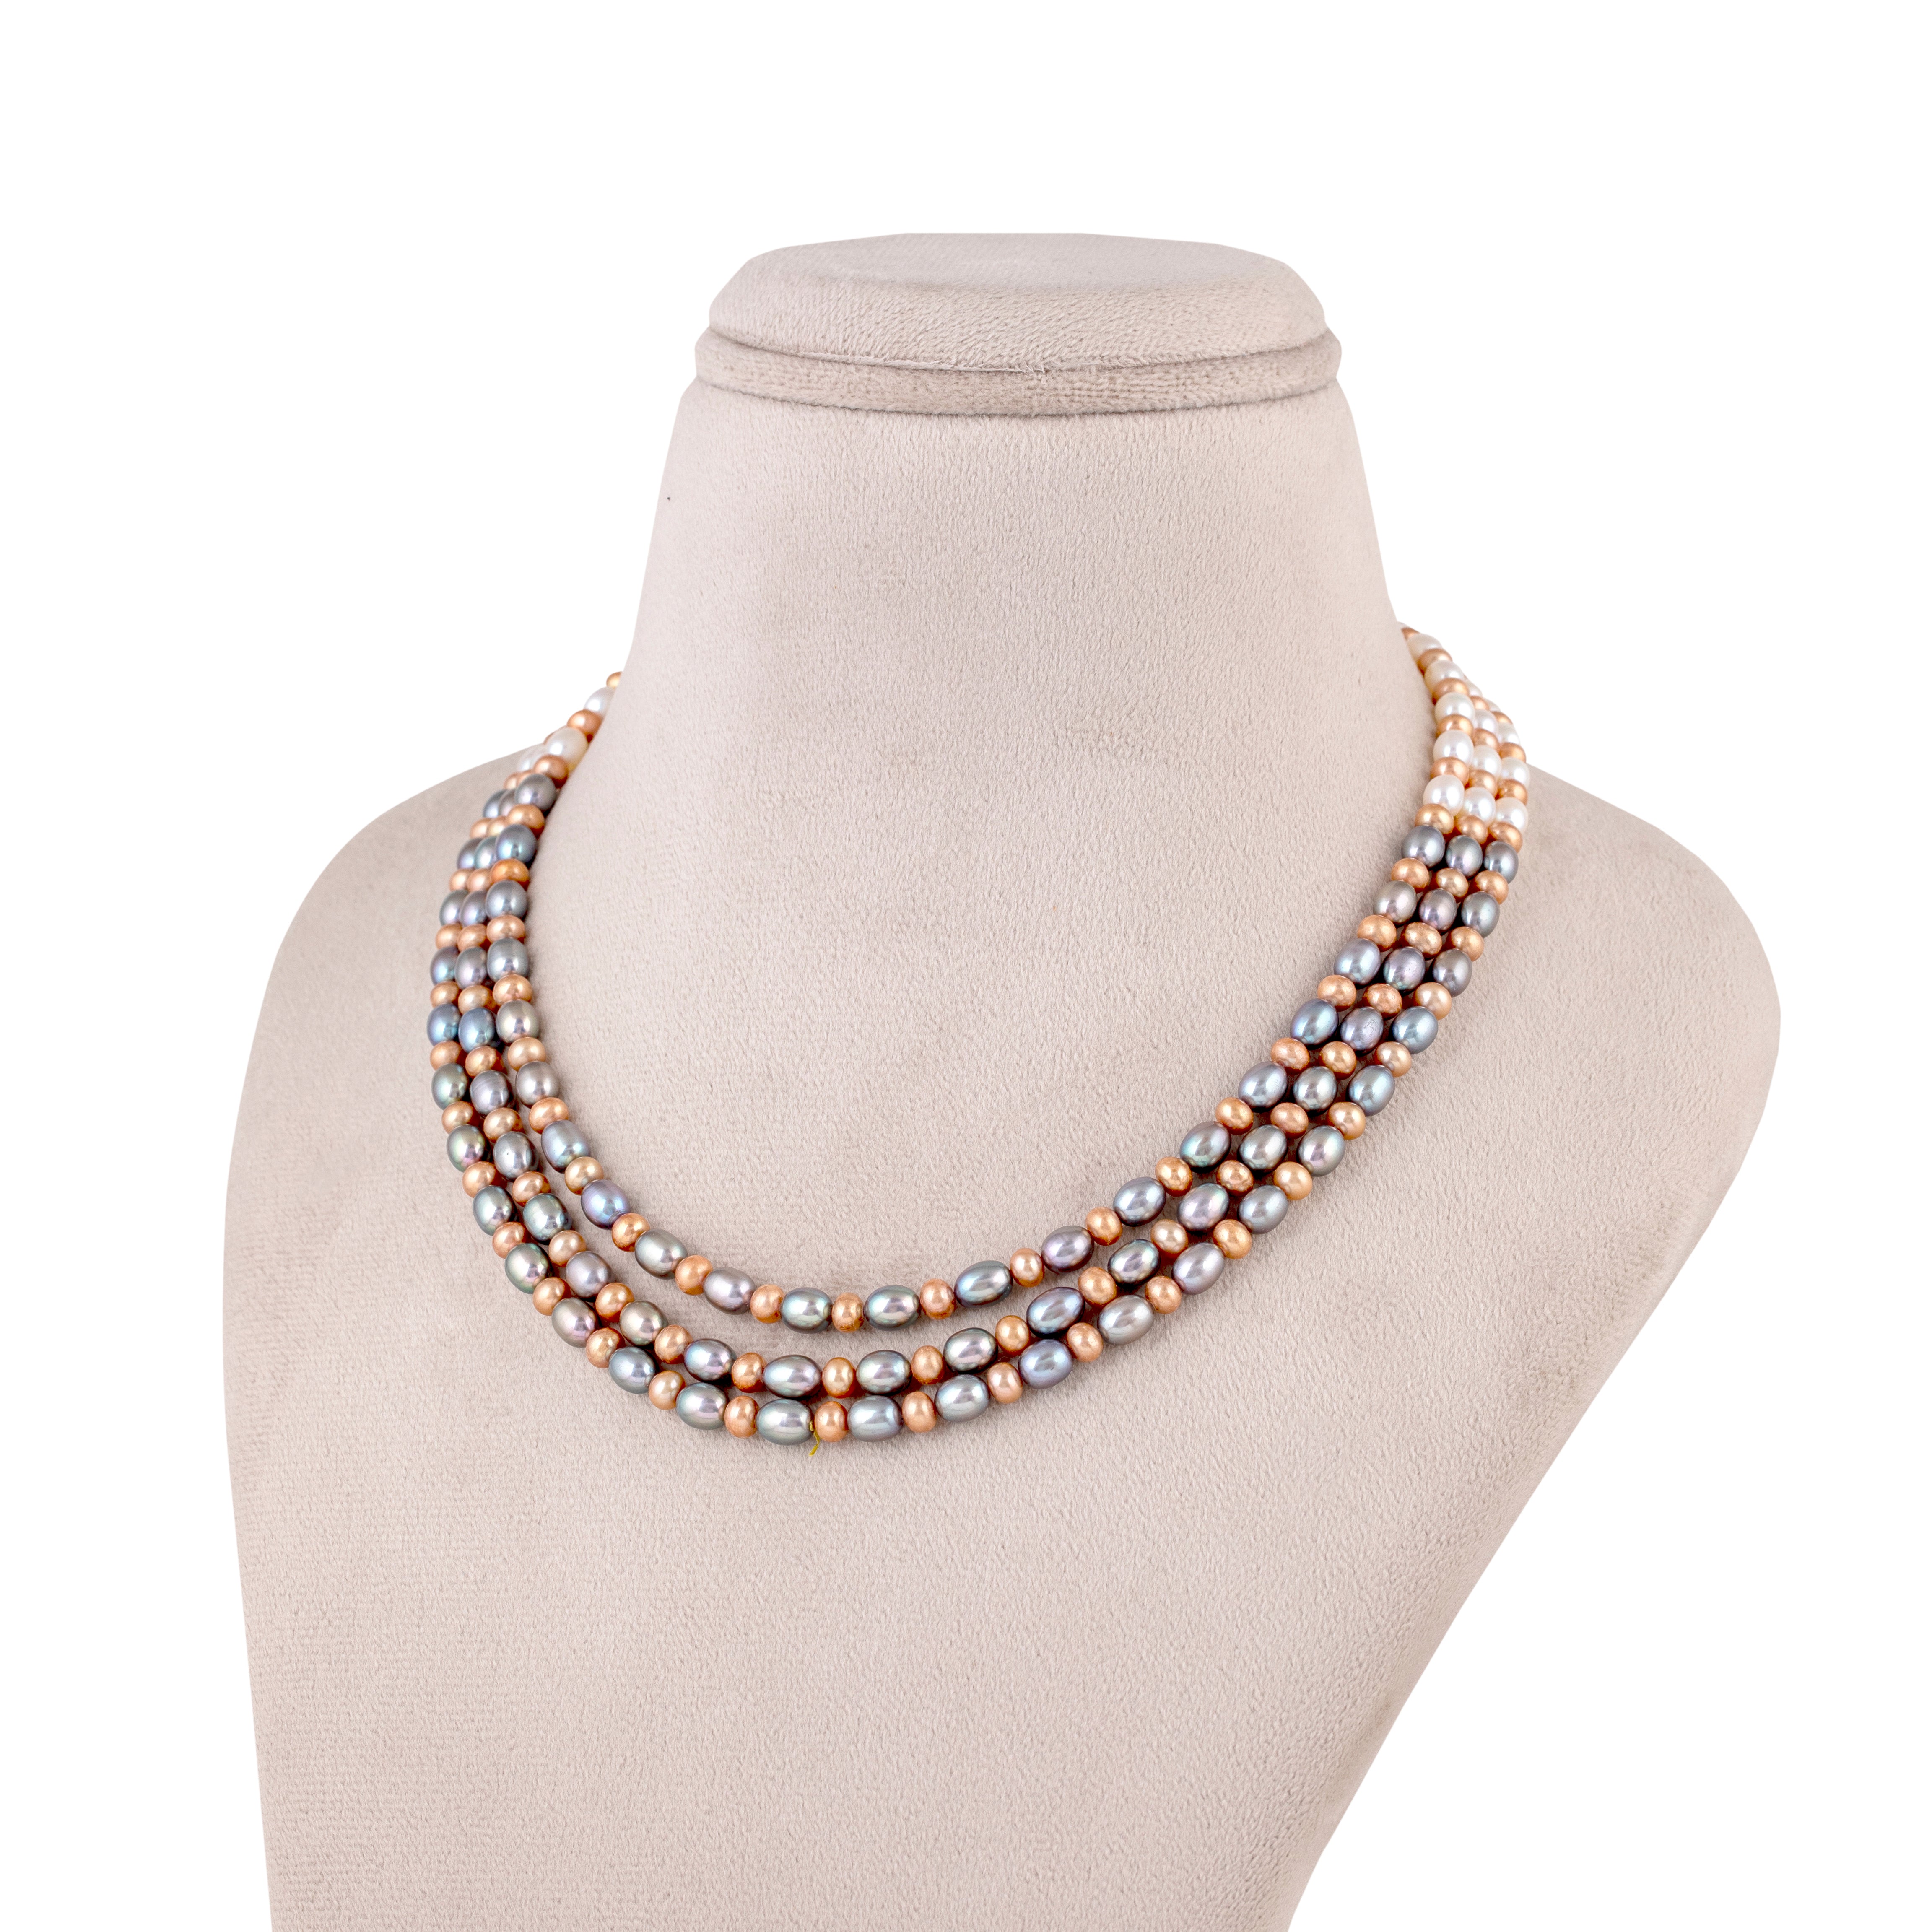 Contrast Harmony Mixed Pearl 3-Line Freshwater Necklace